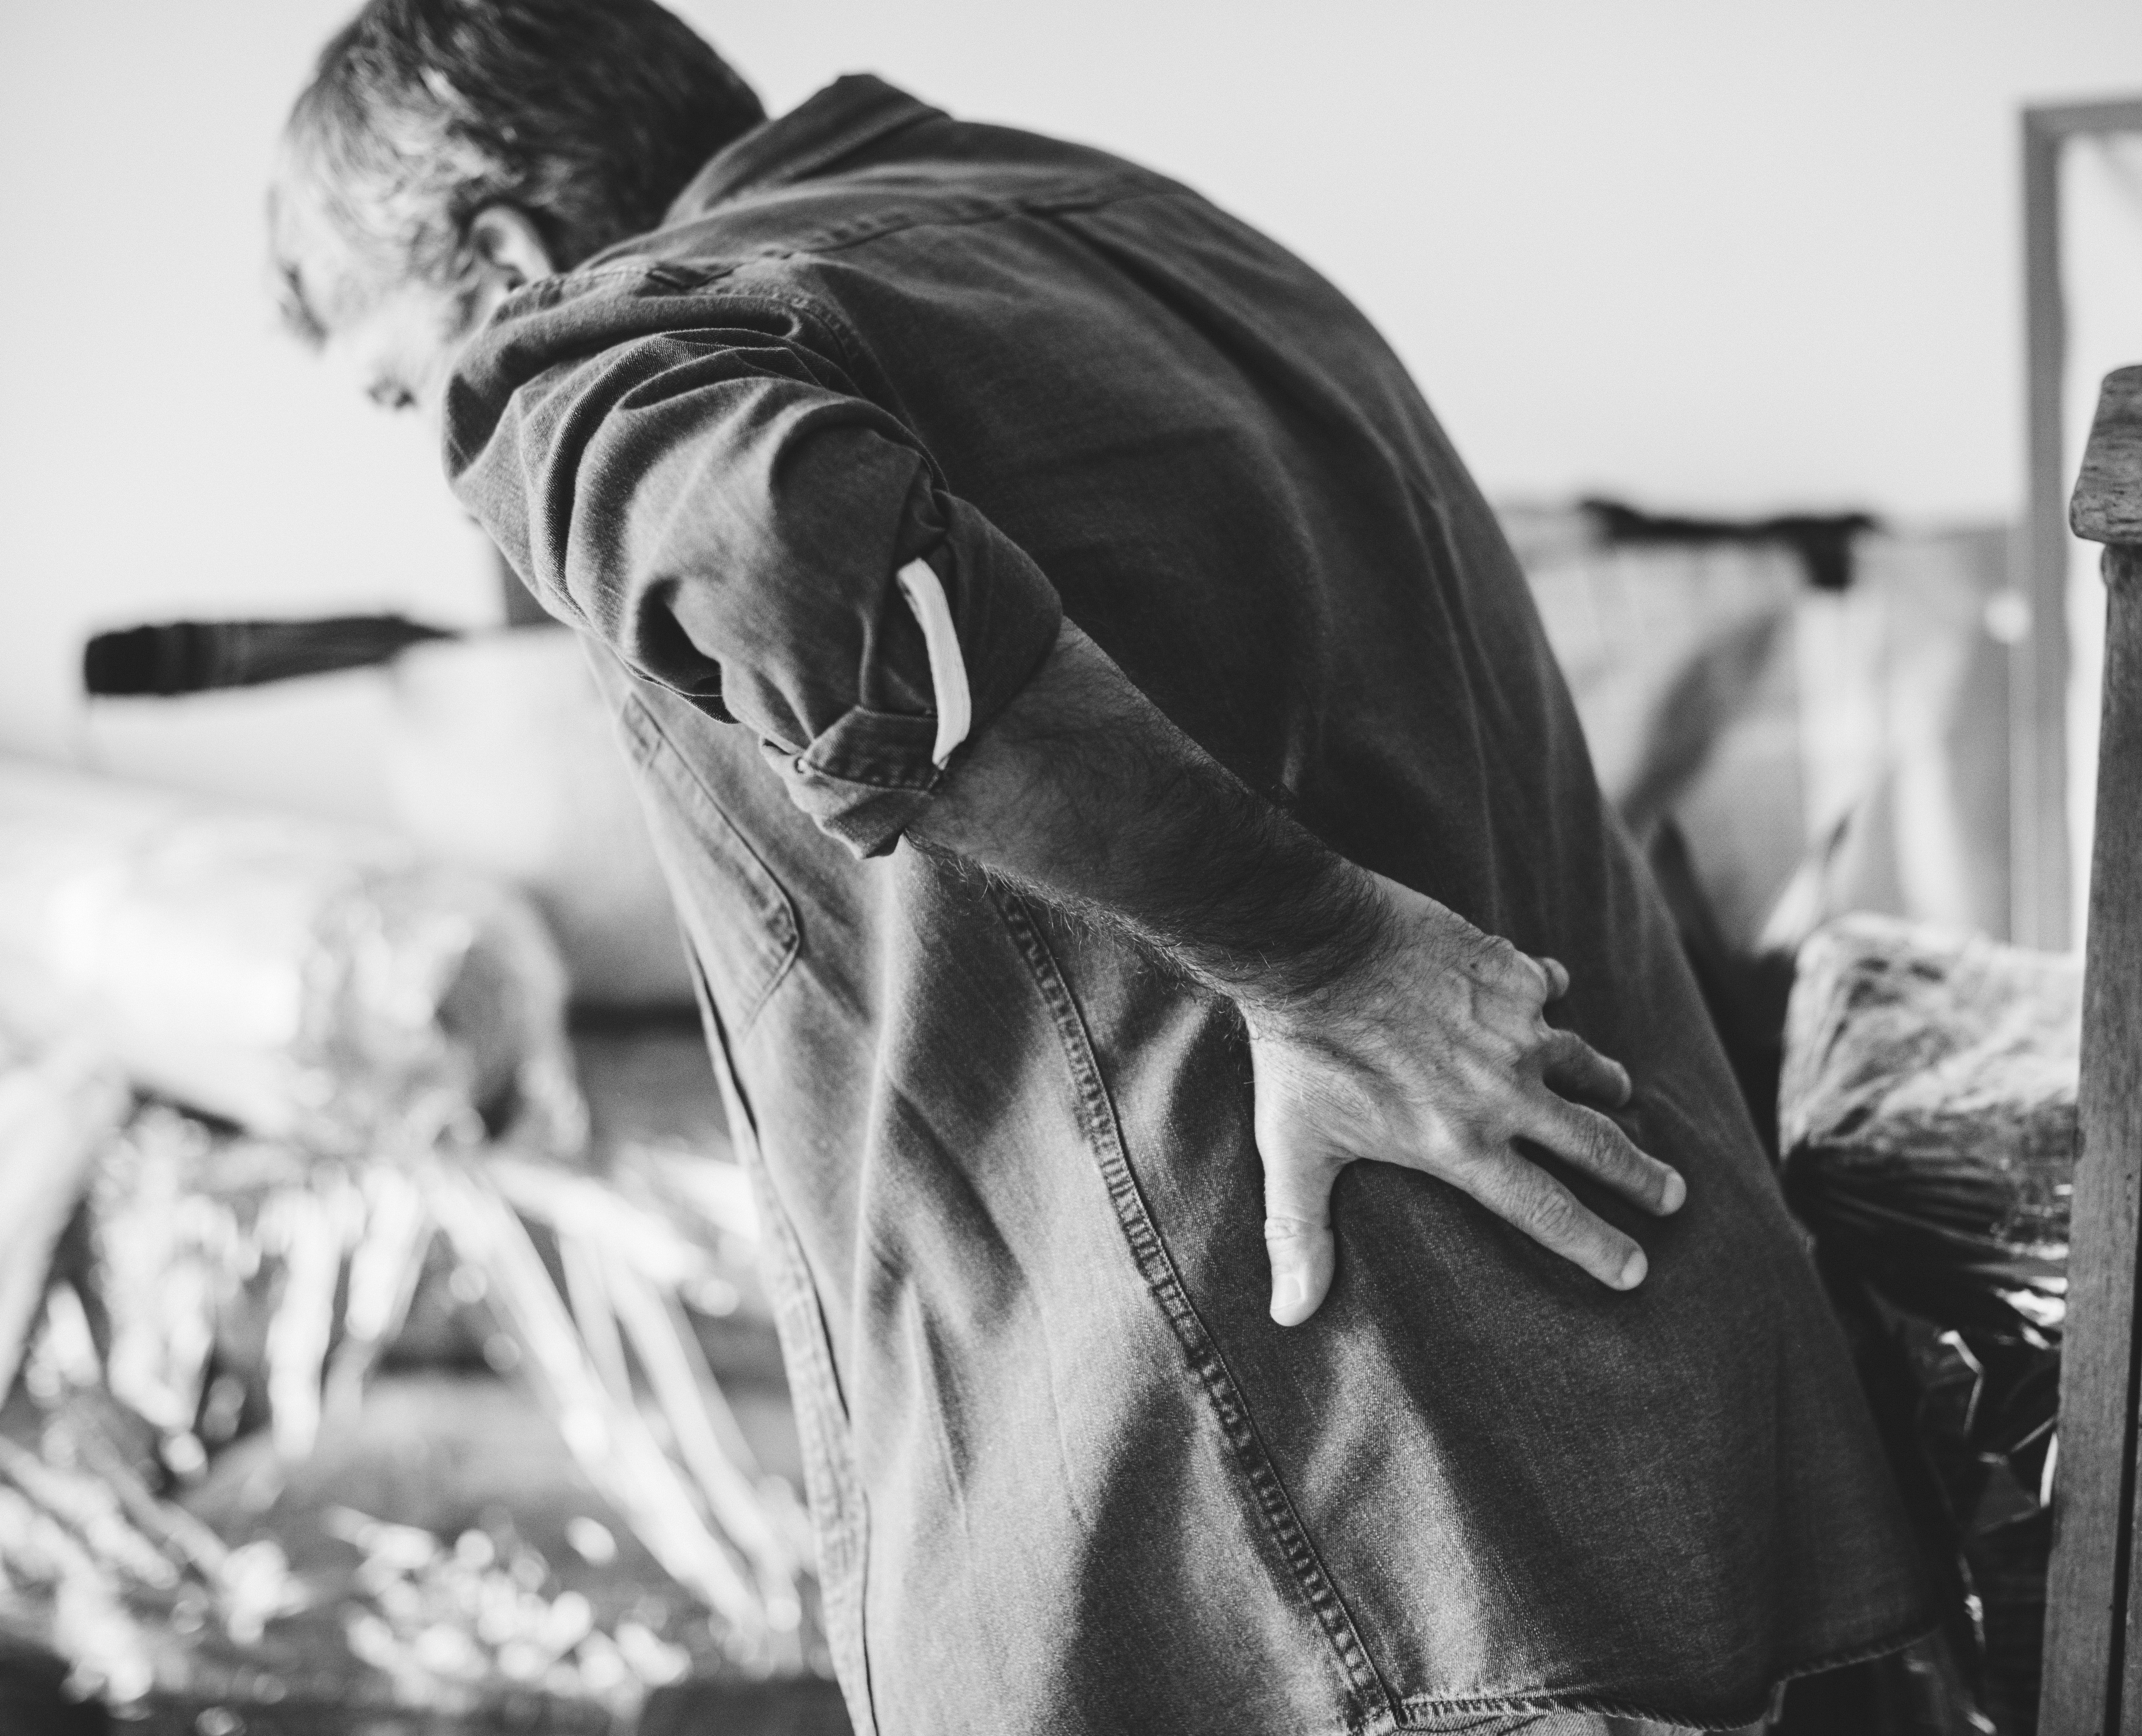 Disease-stricken old man touching his back out of pain. | Source: Pexels